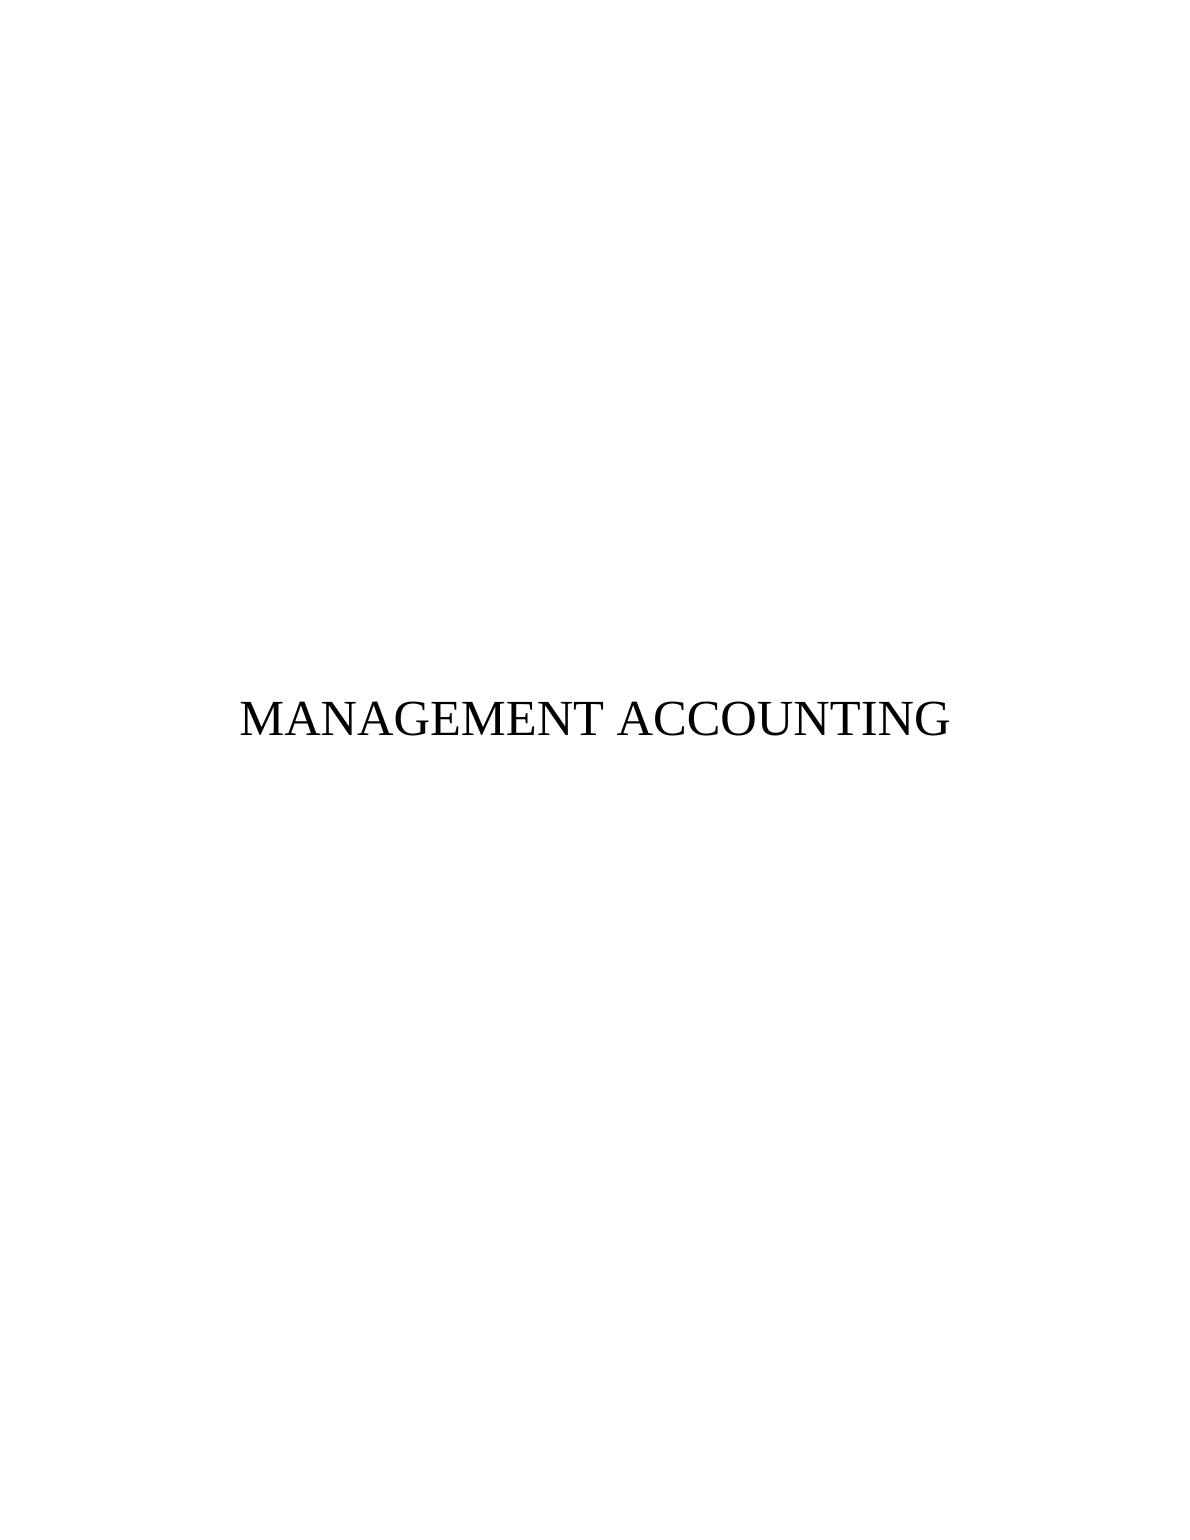 Management Accounting Assignment- Harrods Plc_1